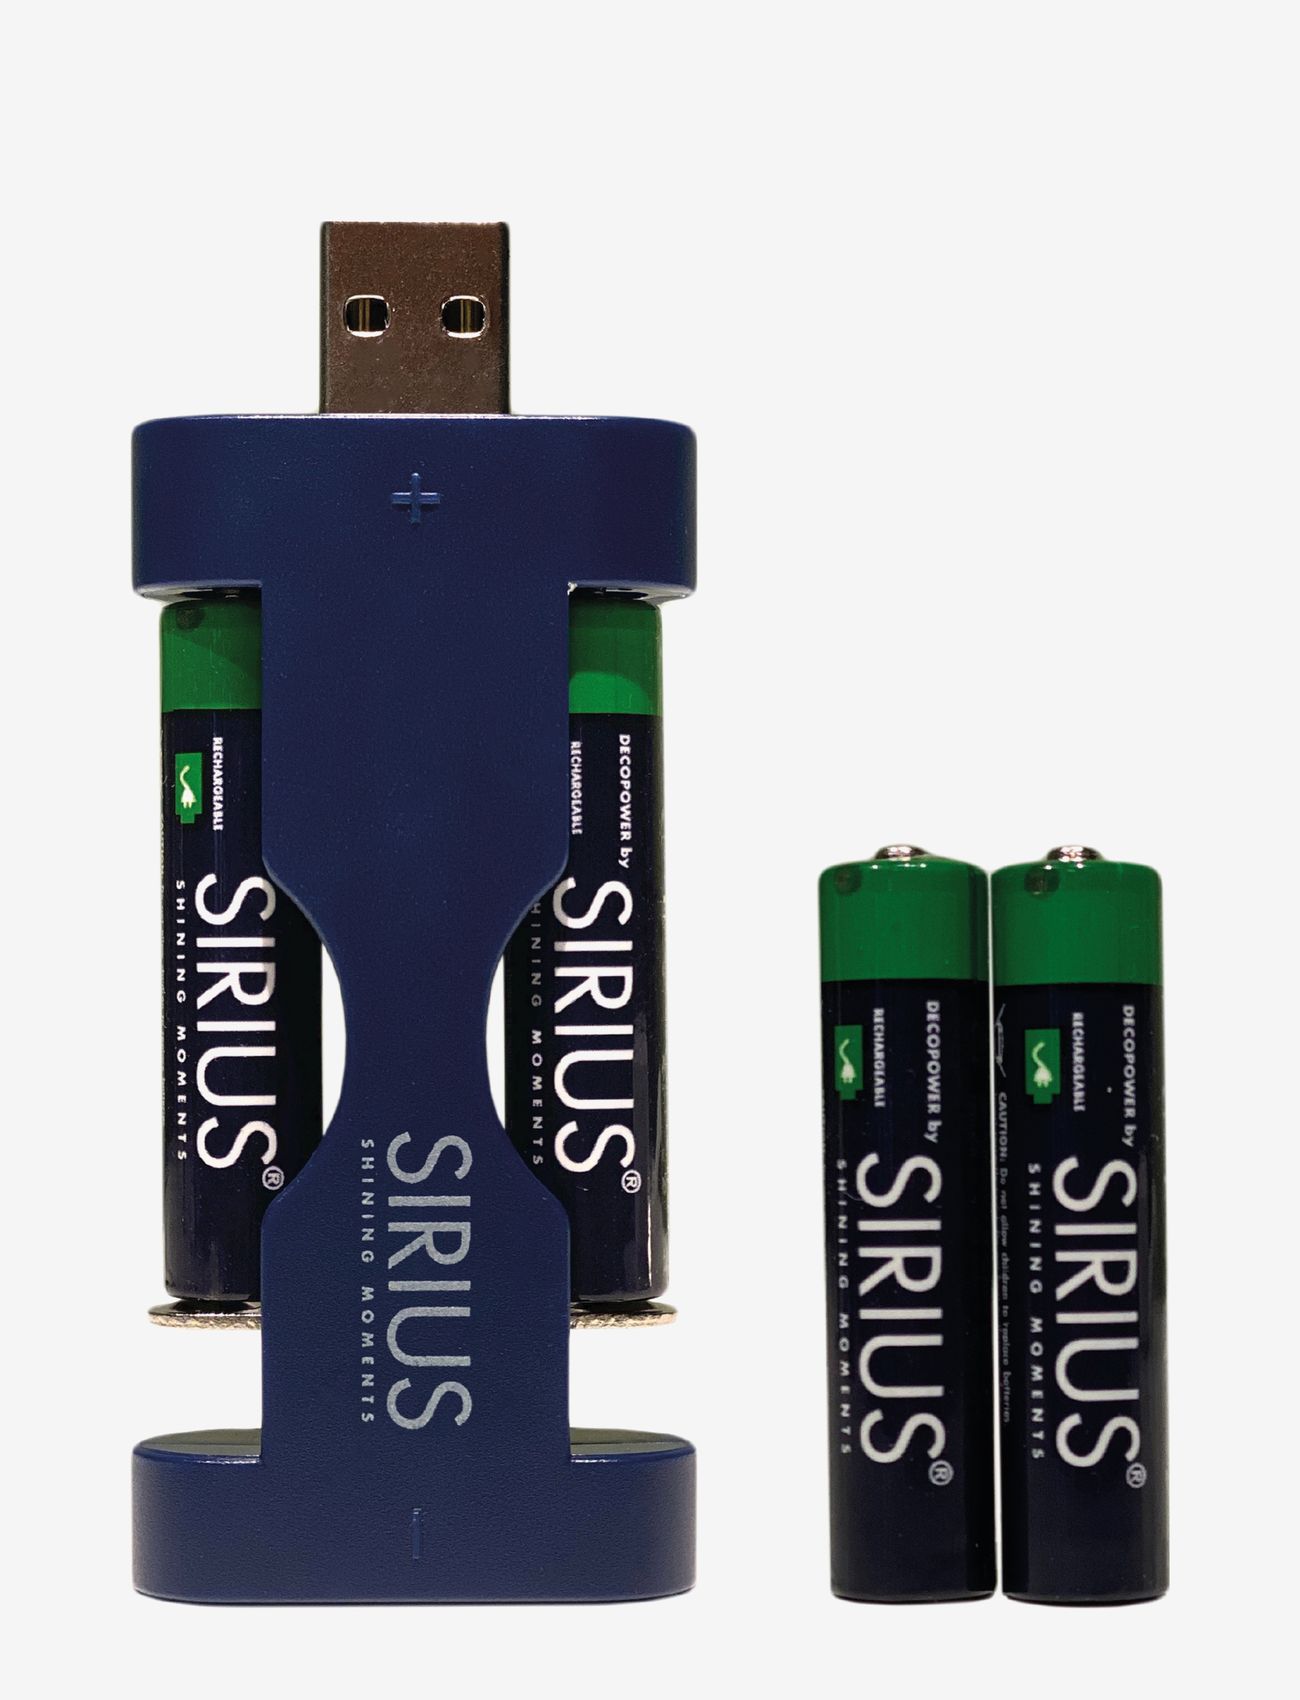 Sirius Home - DecoPower USB Charger incl. 4xAAA Rechargeable Batteries - lägsta priserna - no colour - 0